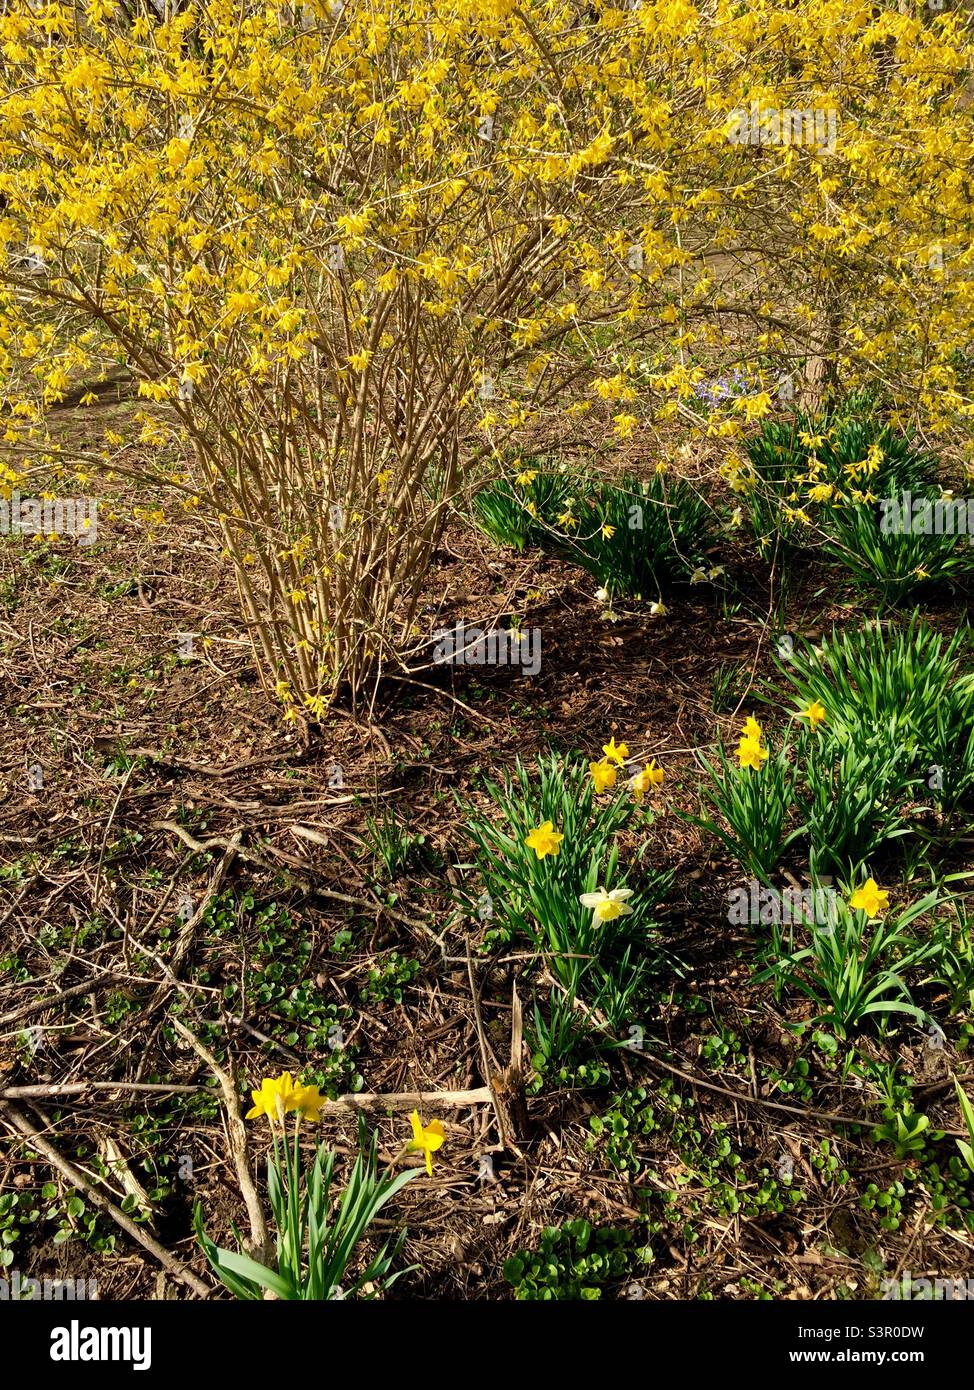 Daffodils and forsythia, yellow gold of early Spring in a wilderness patch, Ontario, Canada. Freshness, new beginning, another cycle. Stock Photo